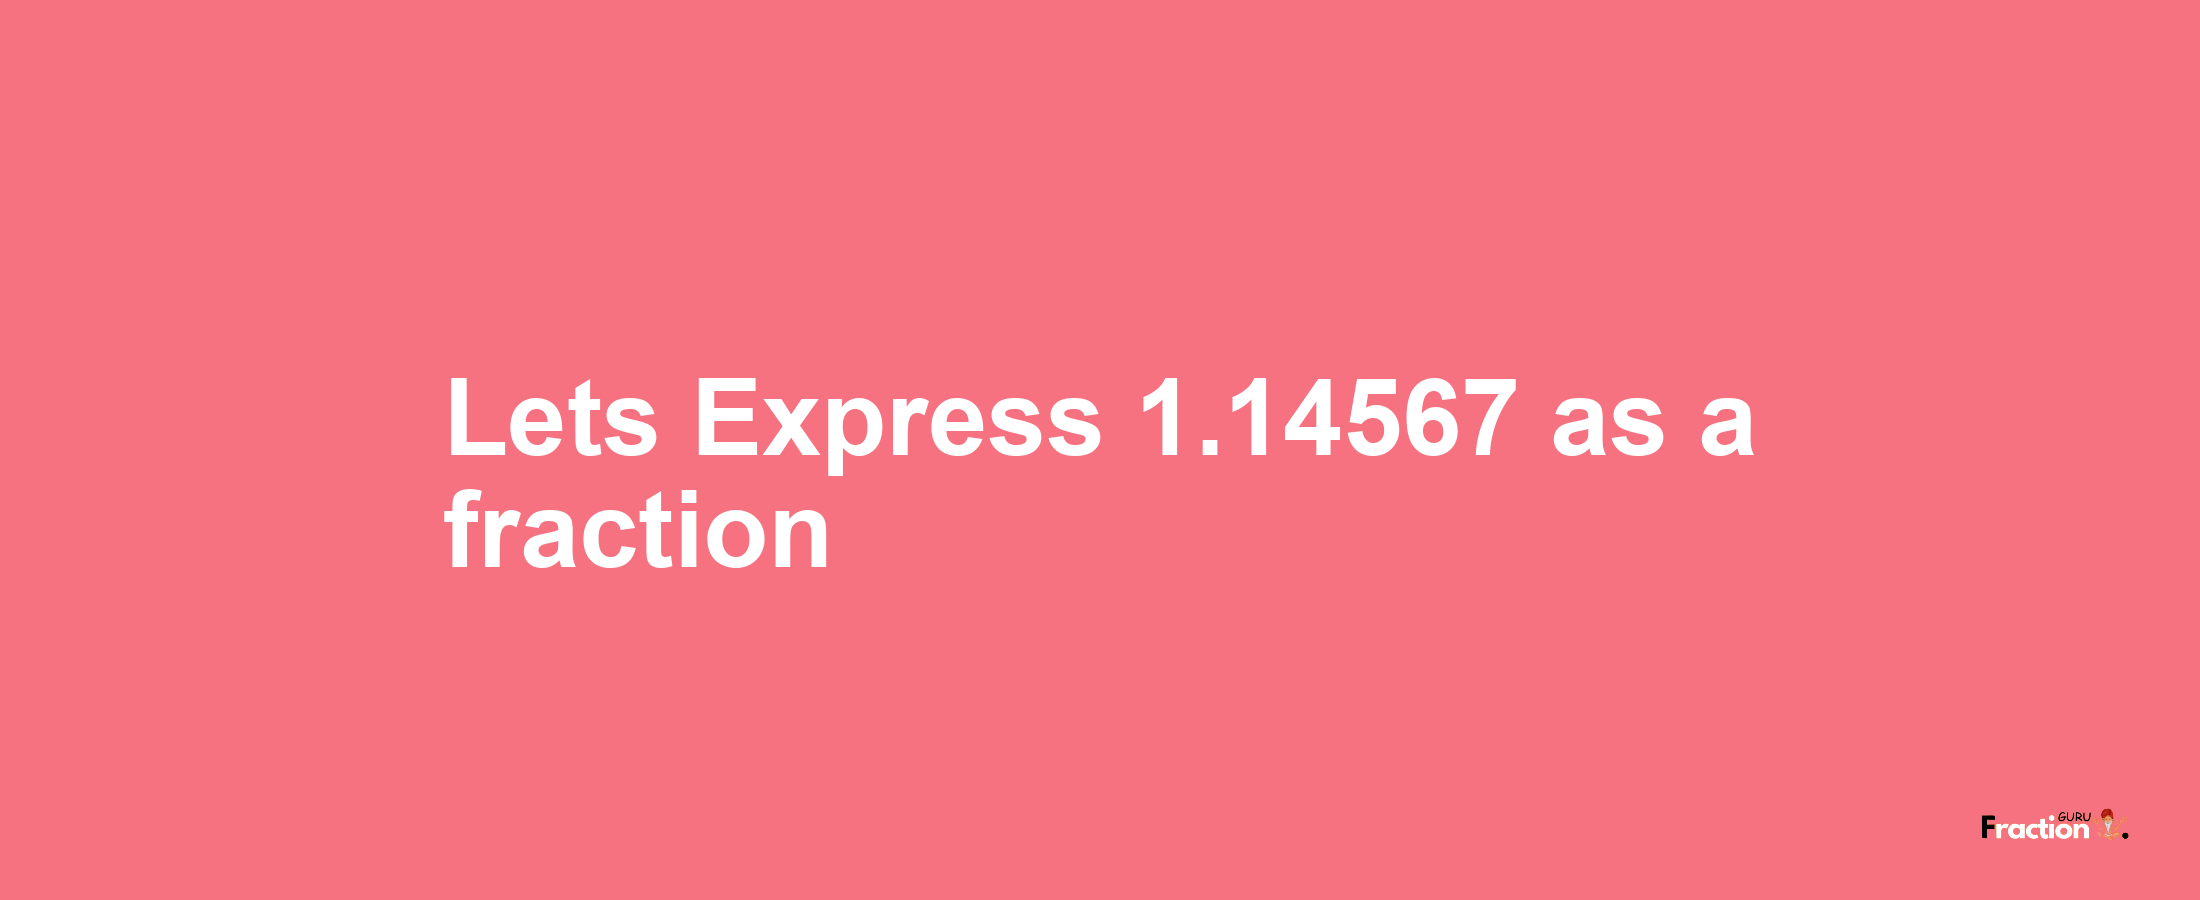 Lets Express 1.14567 as afraction